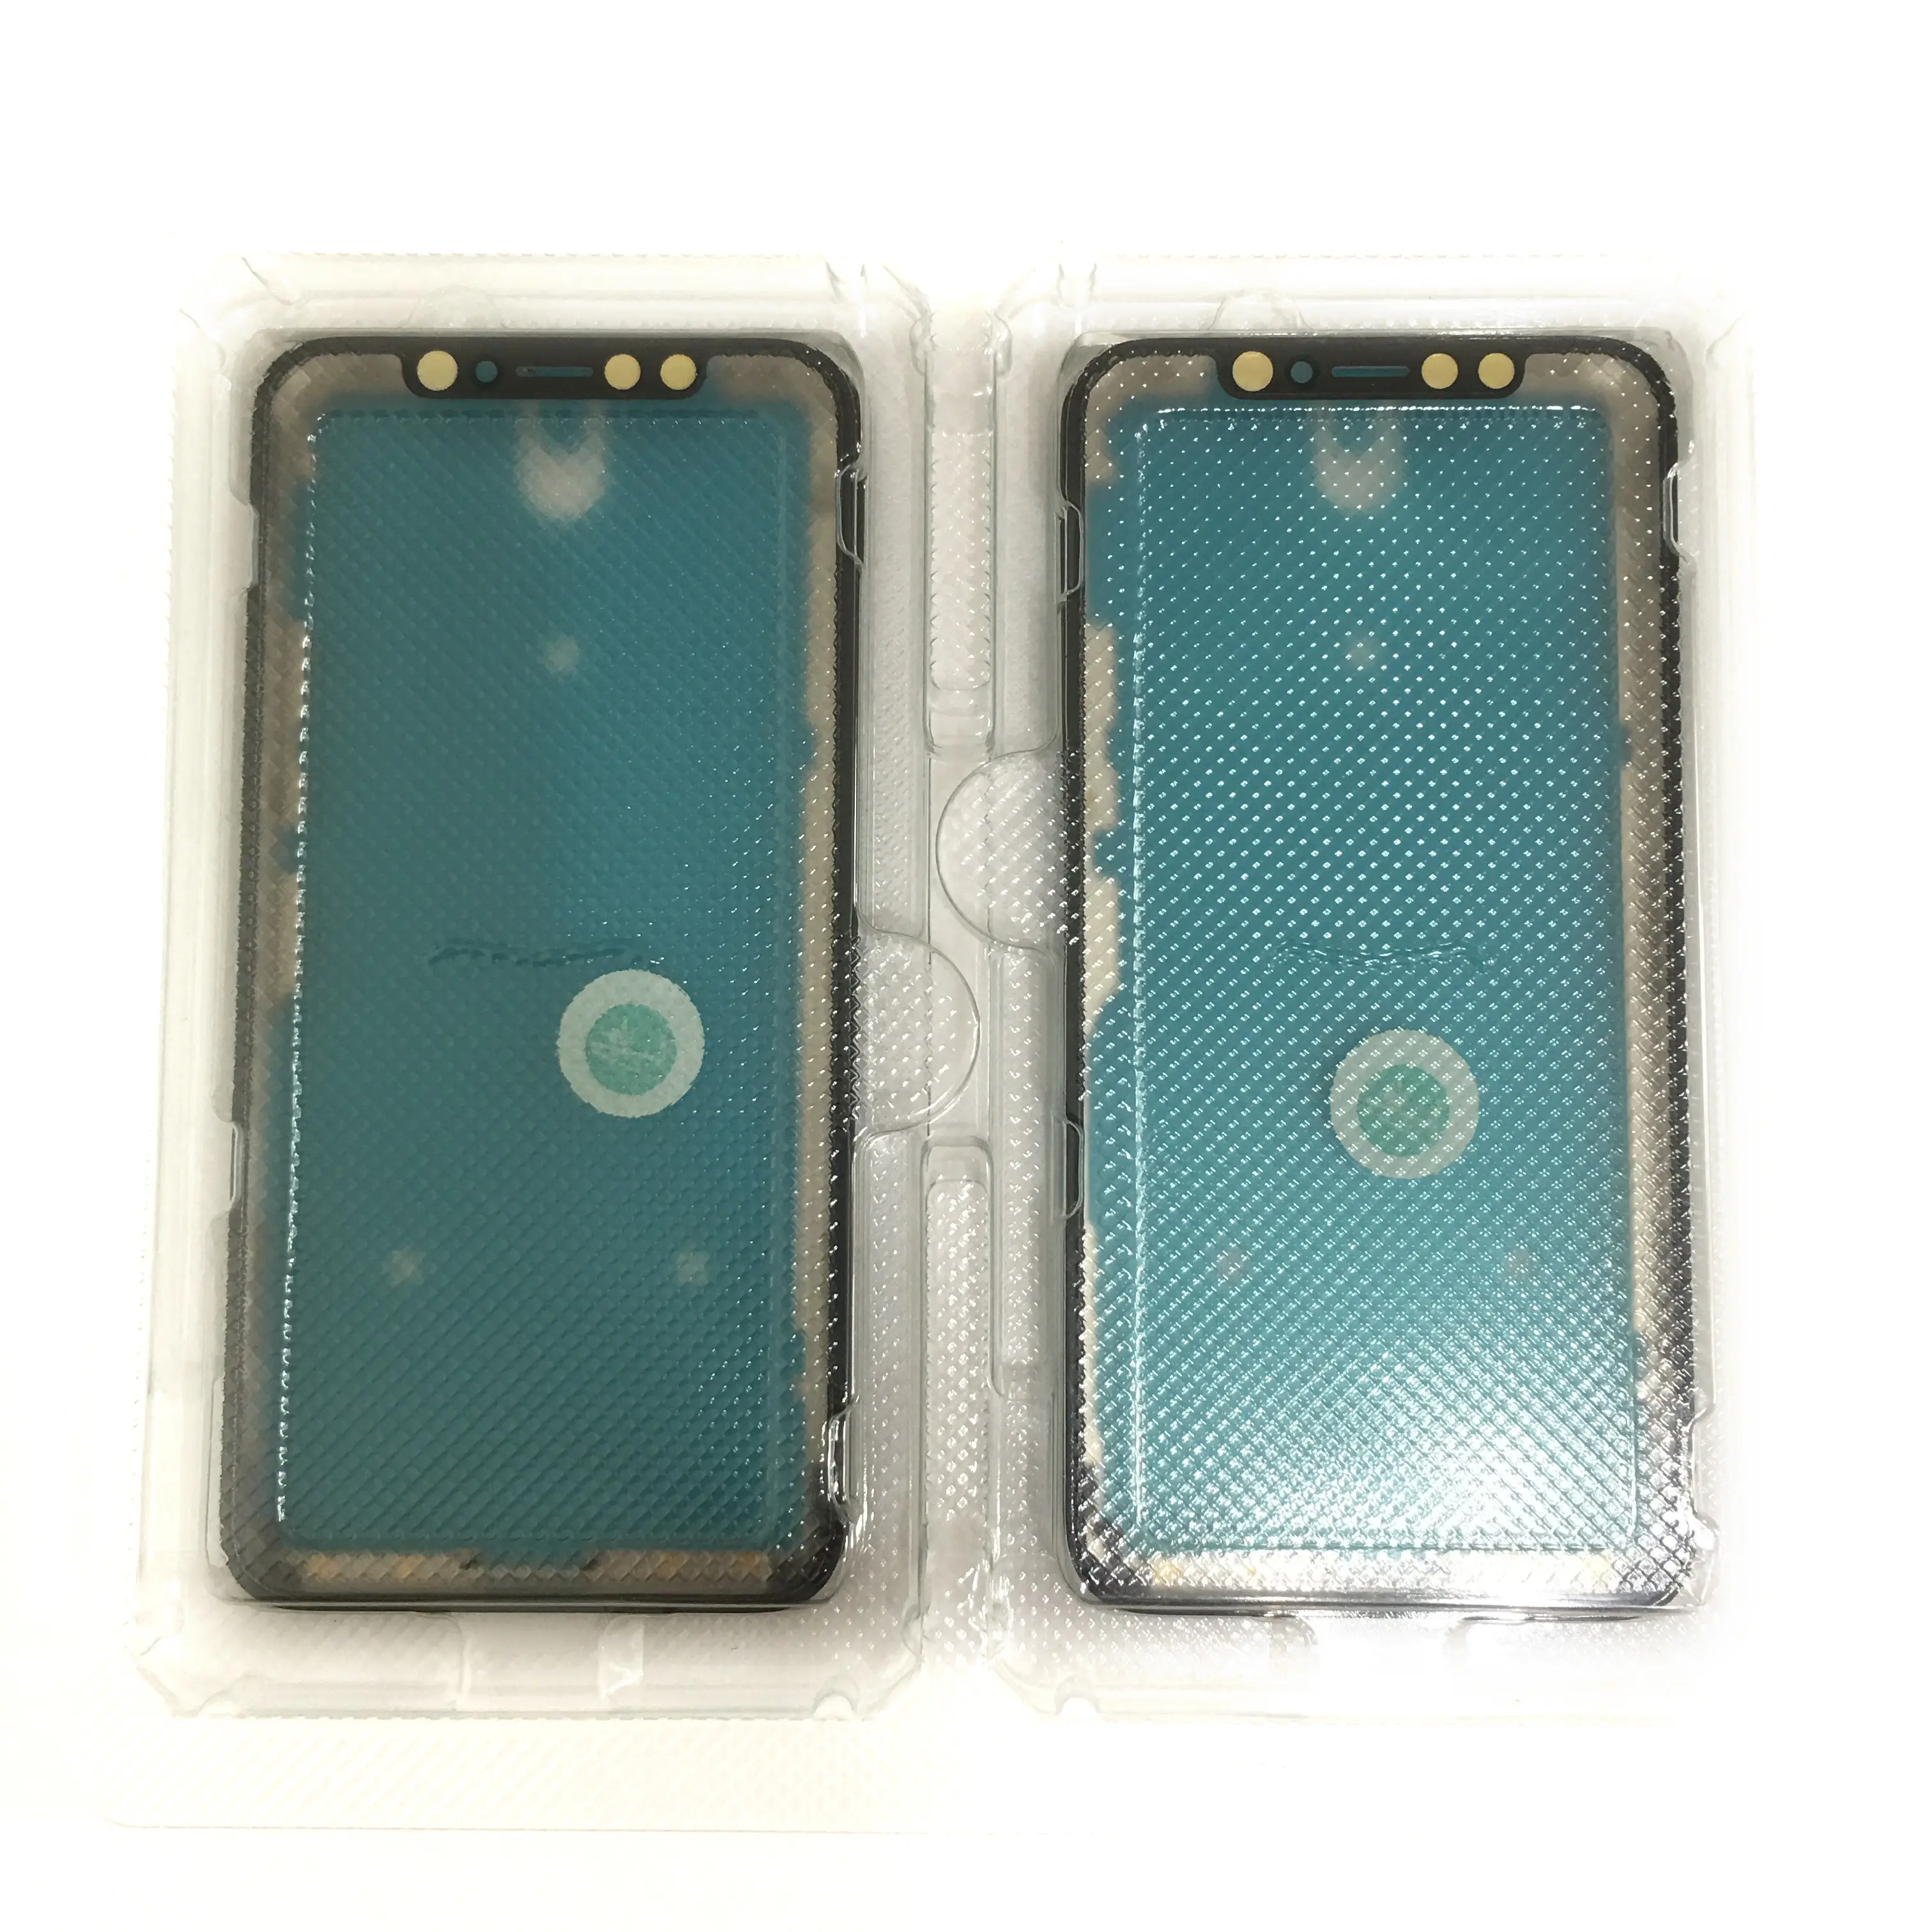 Top Quality 3 in 1 Full Glass Set with OCA and Frame For iPhone X LCD Screen Repair, Factory For iPhone X 3 in 1 Glass OCA Frame